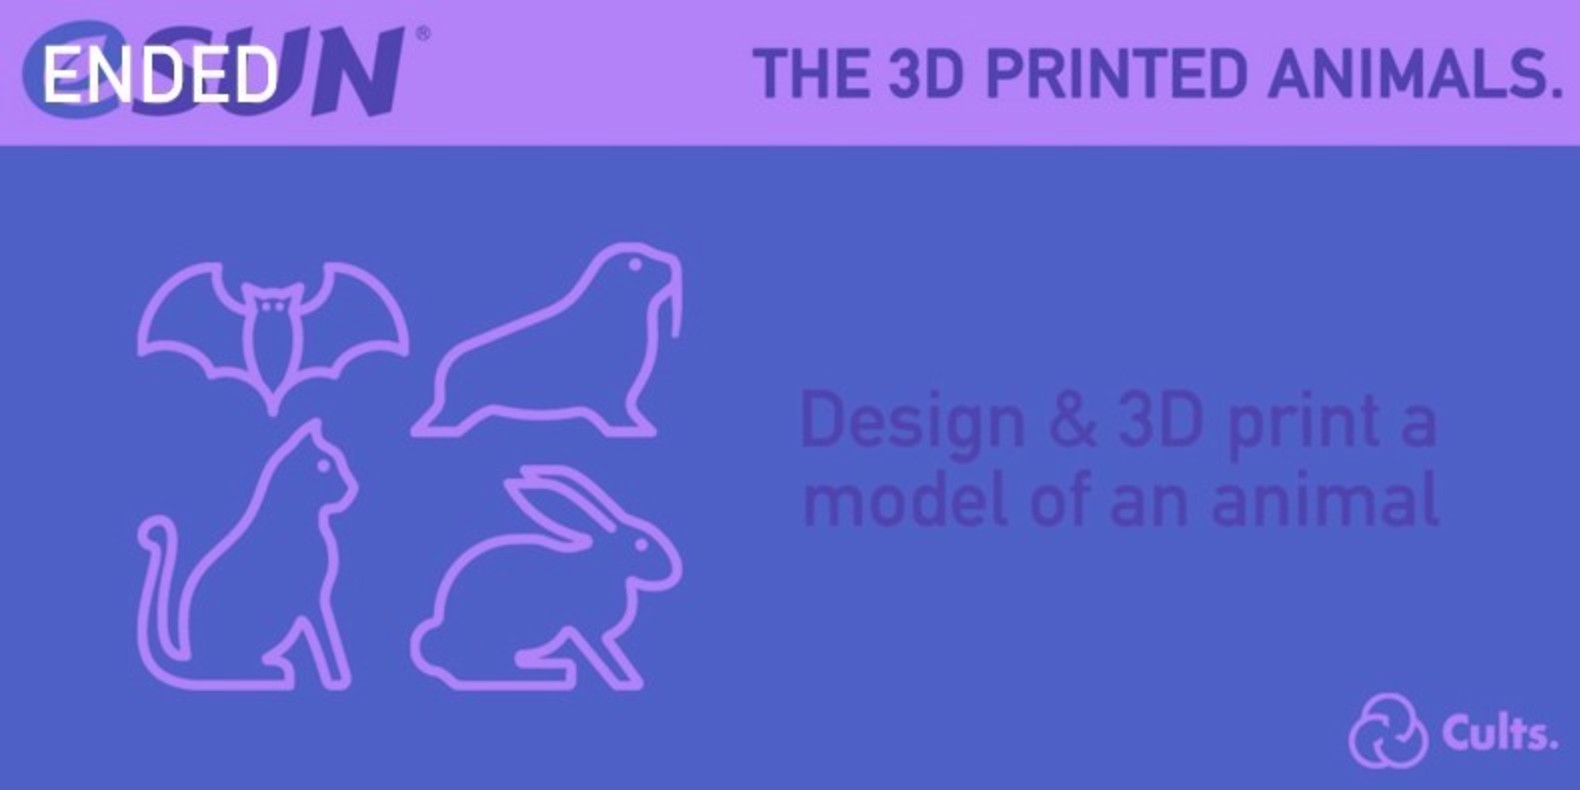 The challenge of design and 3D printing about Animals